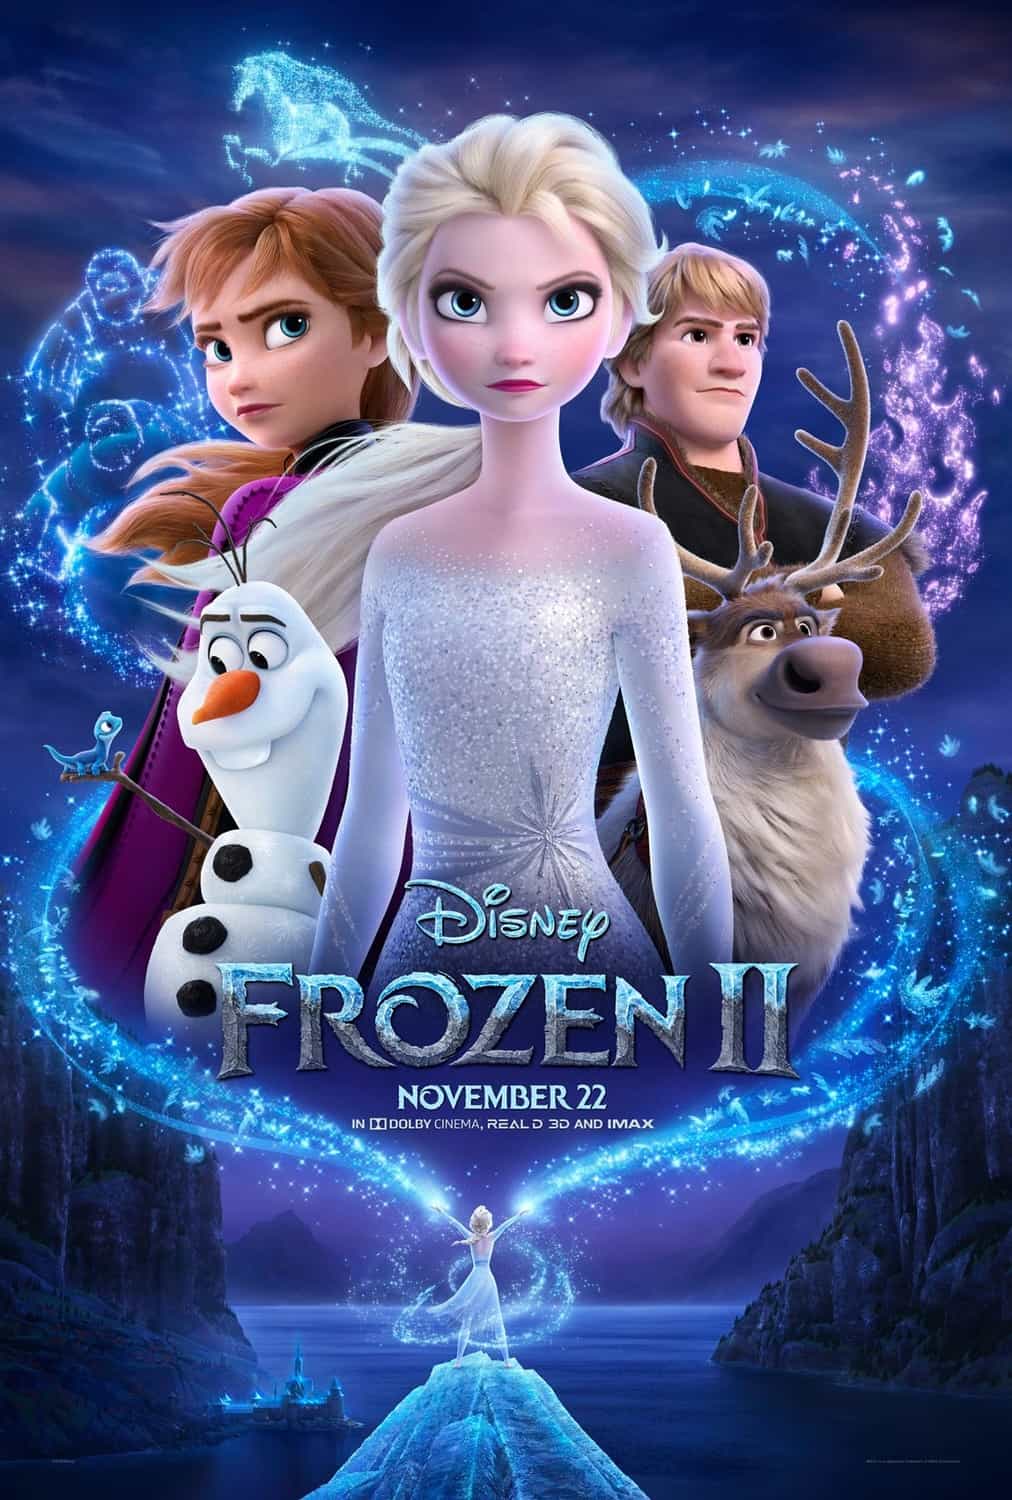 World Box Office Analysis 22nd - 24th November 2019: Three new films enter inside the top five headed by Frozen II which debuts with $350 Million at the top